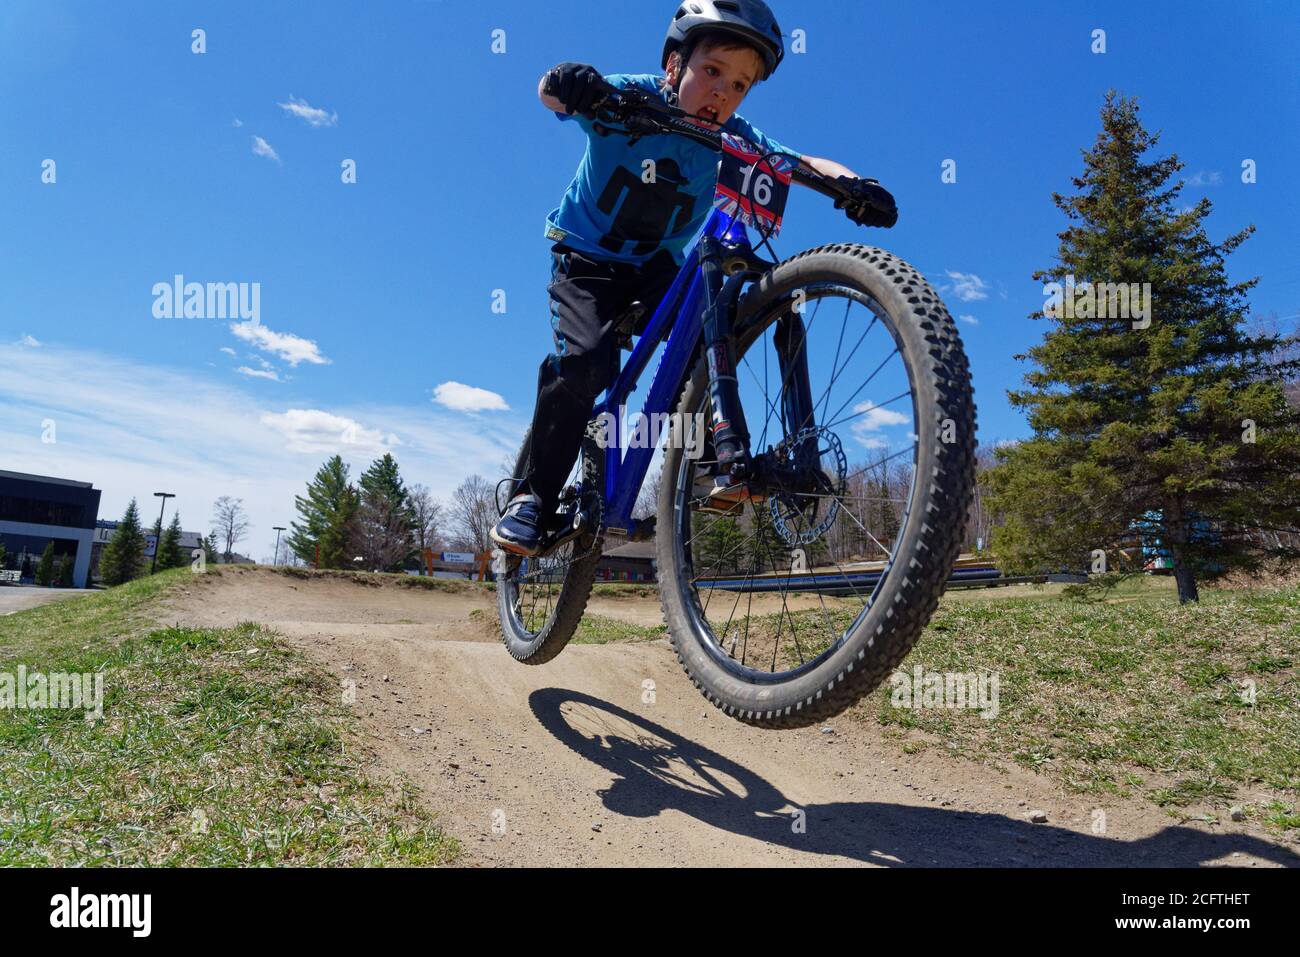 A young boy (8 yrs old) jumping on his mountain bike Stock Photo